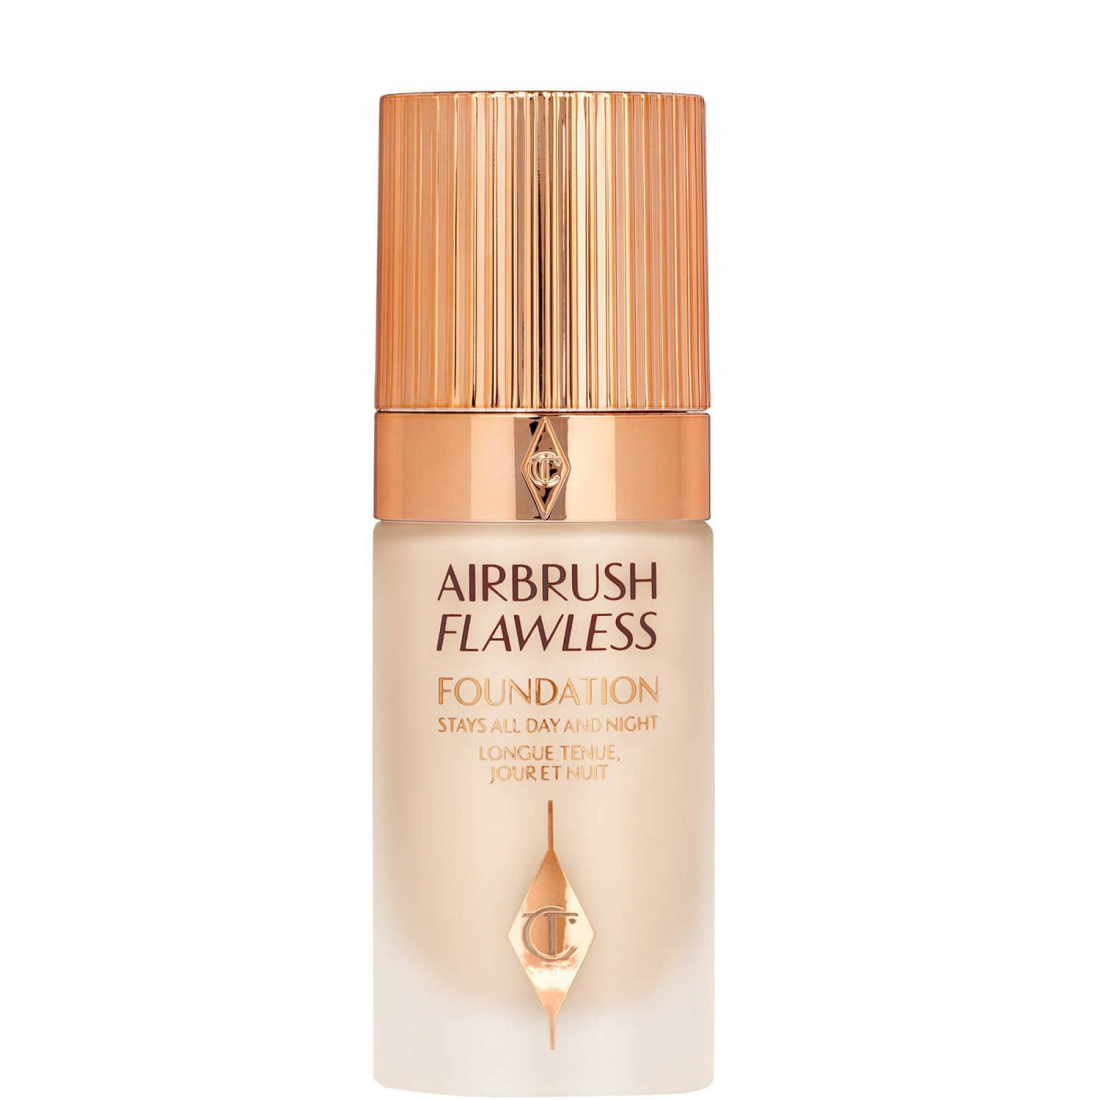 'Airbrush Flawless Stays All Day' Foundation - 2 Neutral 30 ml